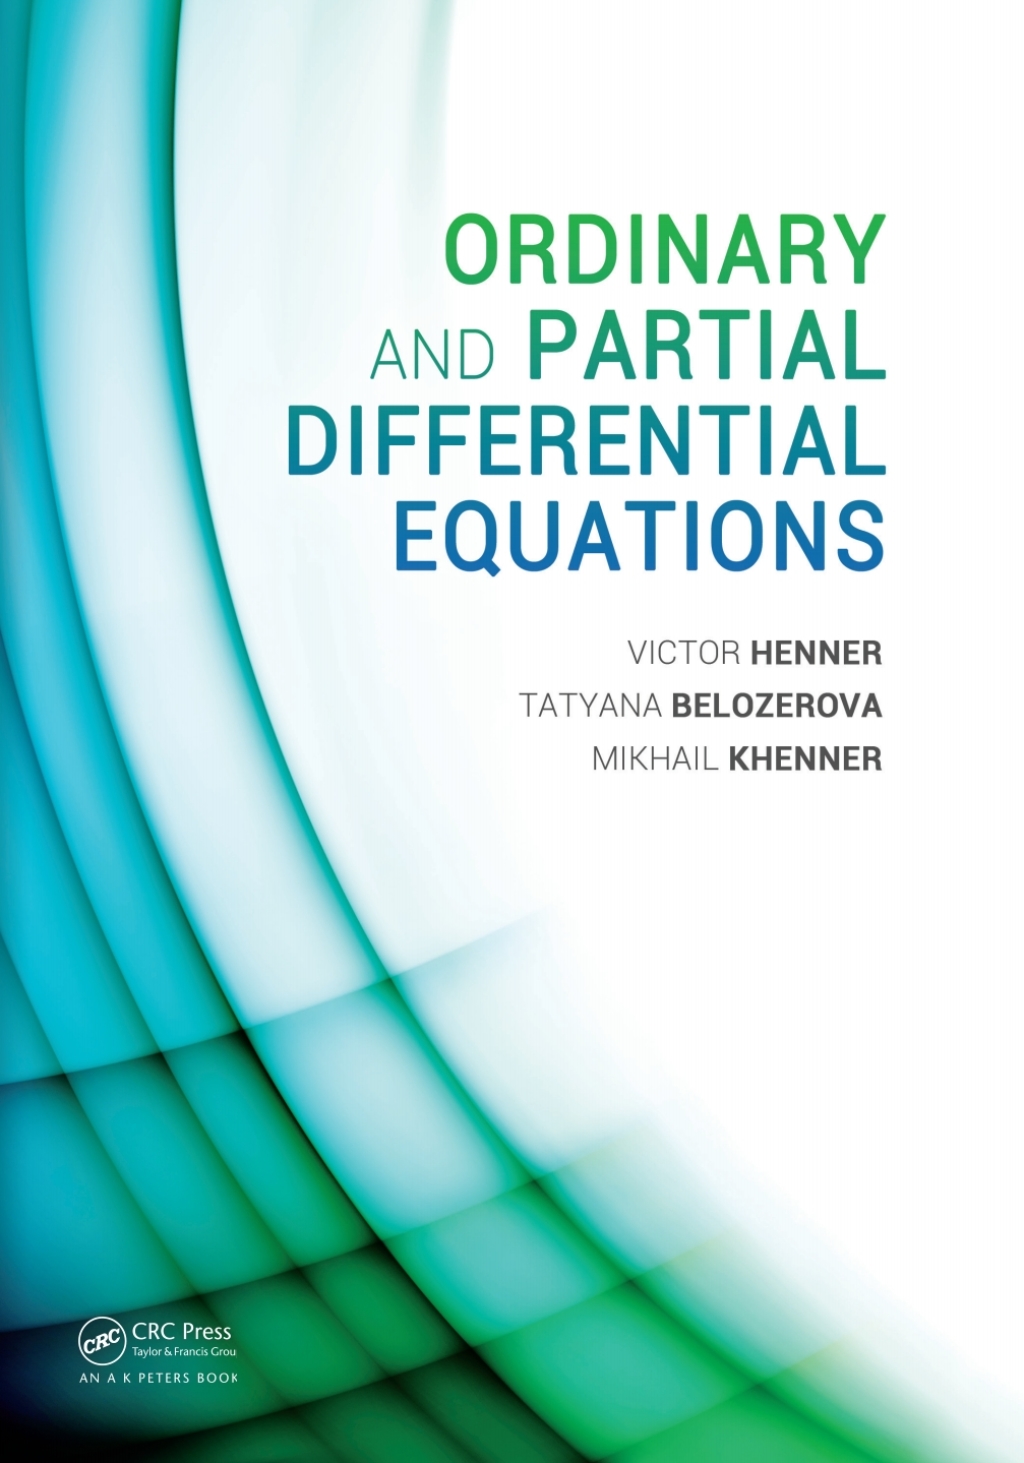 Ordinary and Partial Differential Equations (eBook) - Victor Henner; Tatyana Belozerova; Mikhail Khenner